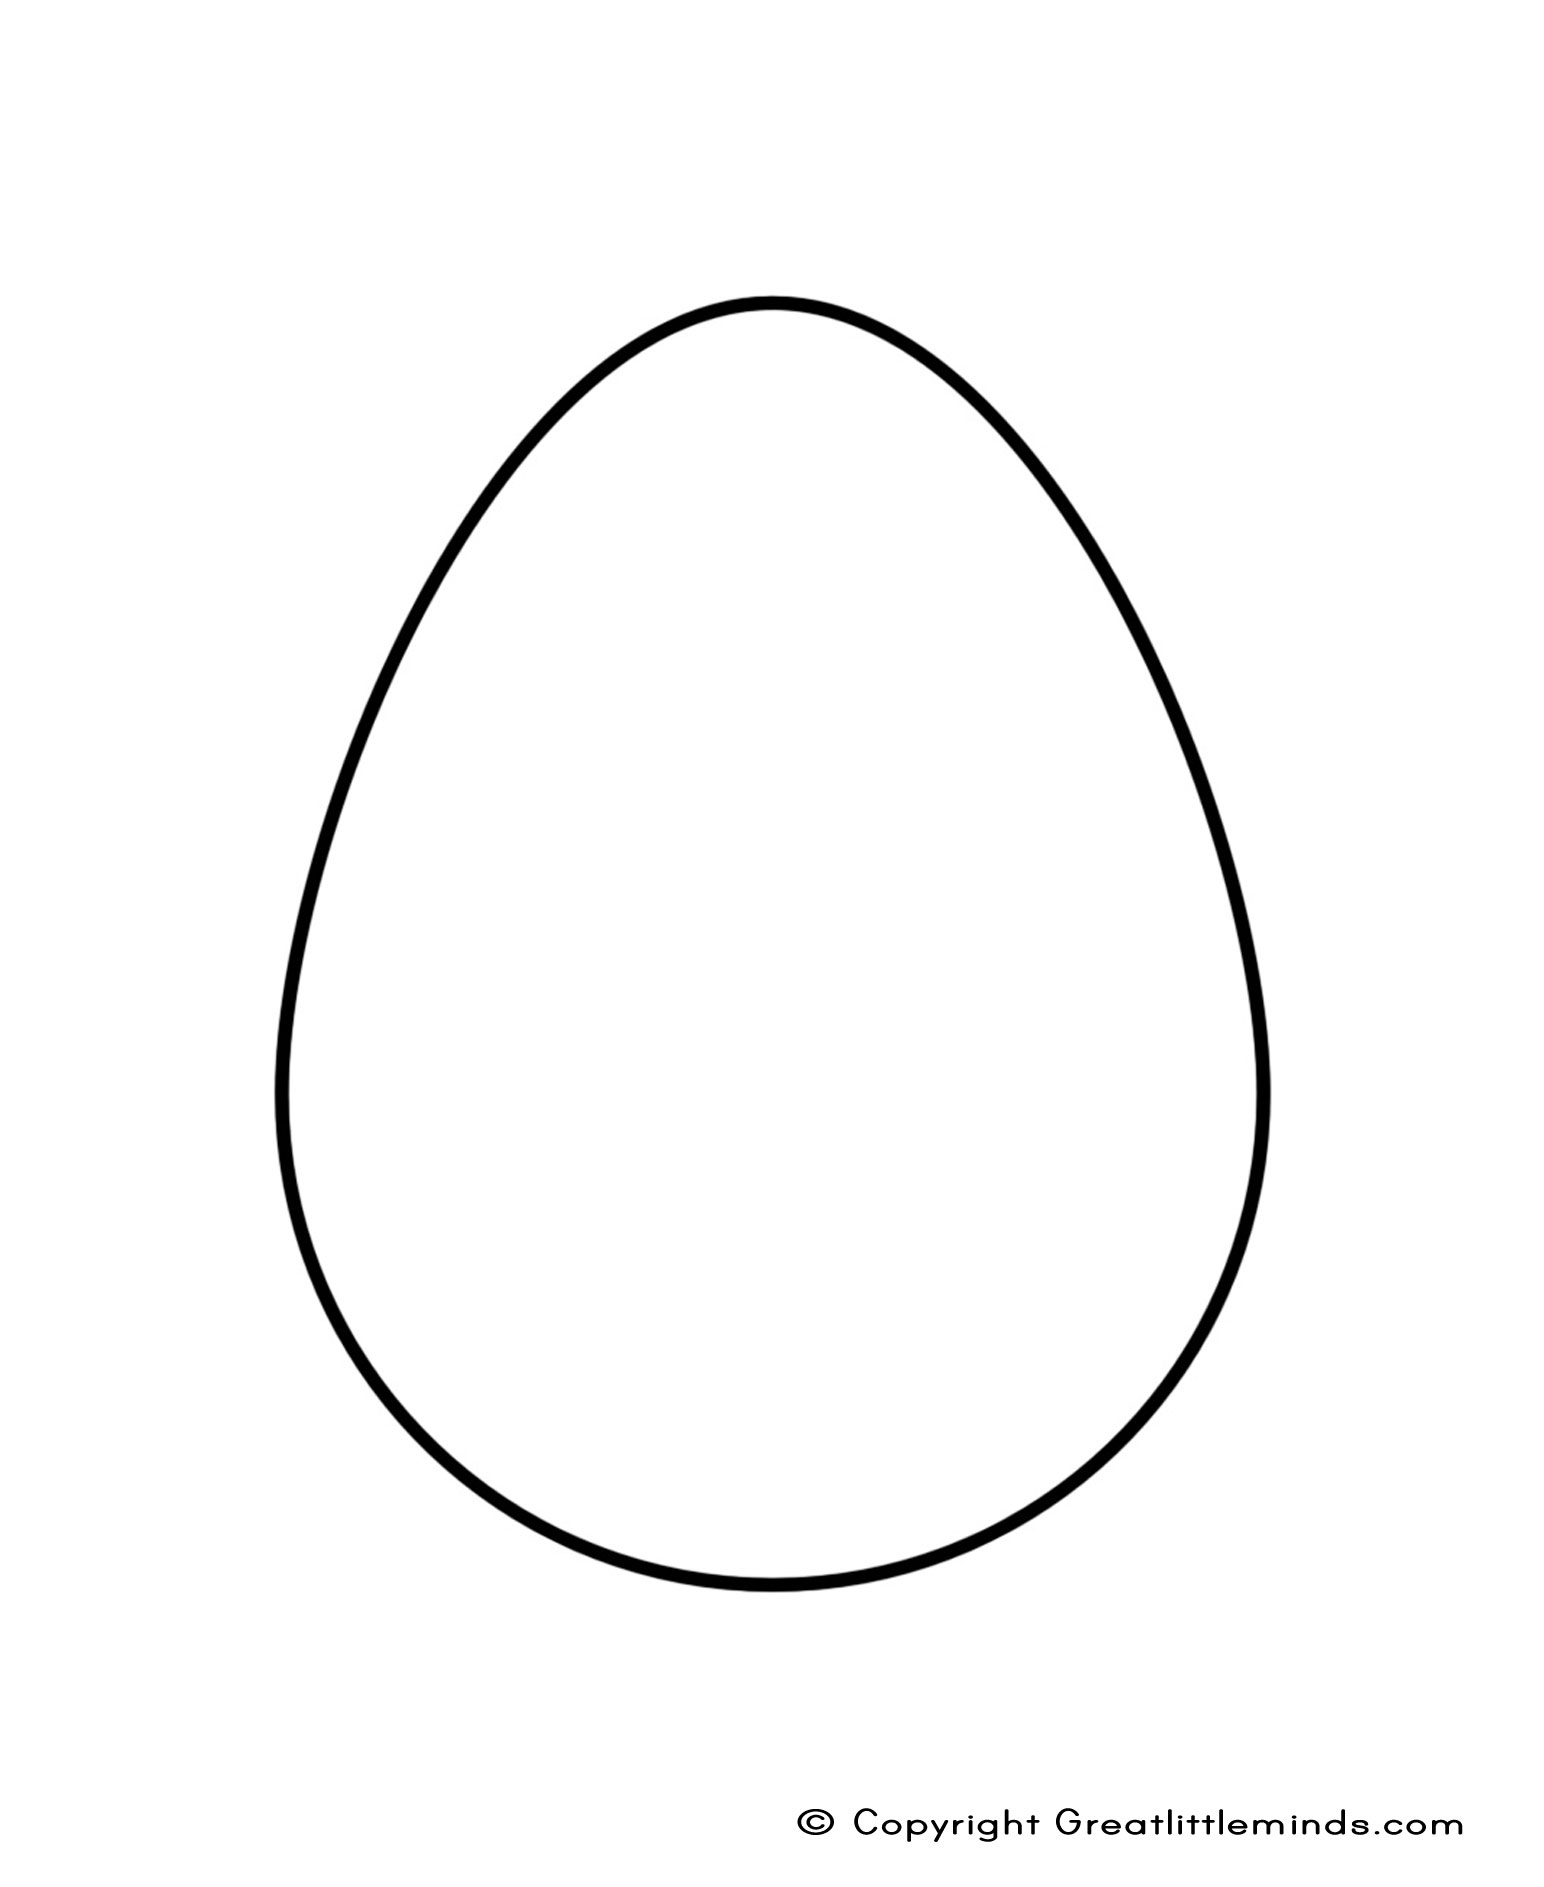 Images of Plain Easter Egg Coloring Pages - Jefney